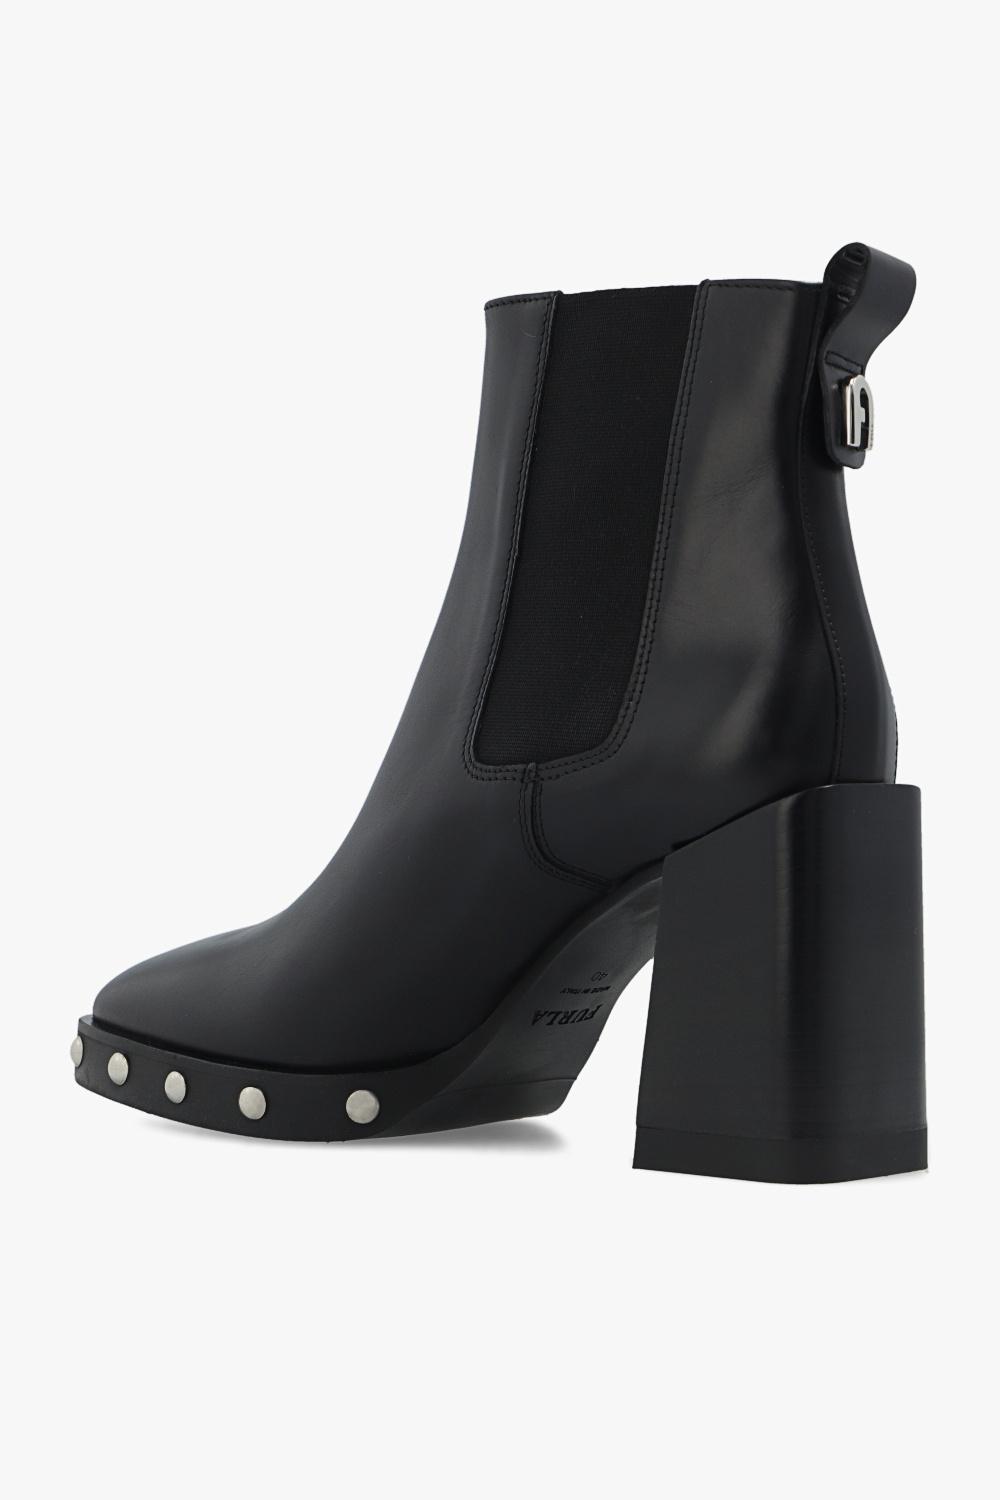 Furla 'greta' Leather Ankle Boots in Black | Lyst